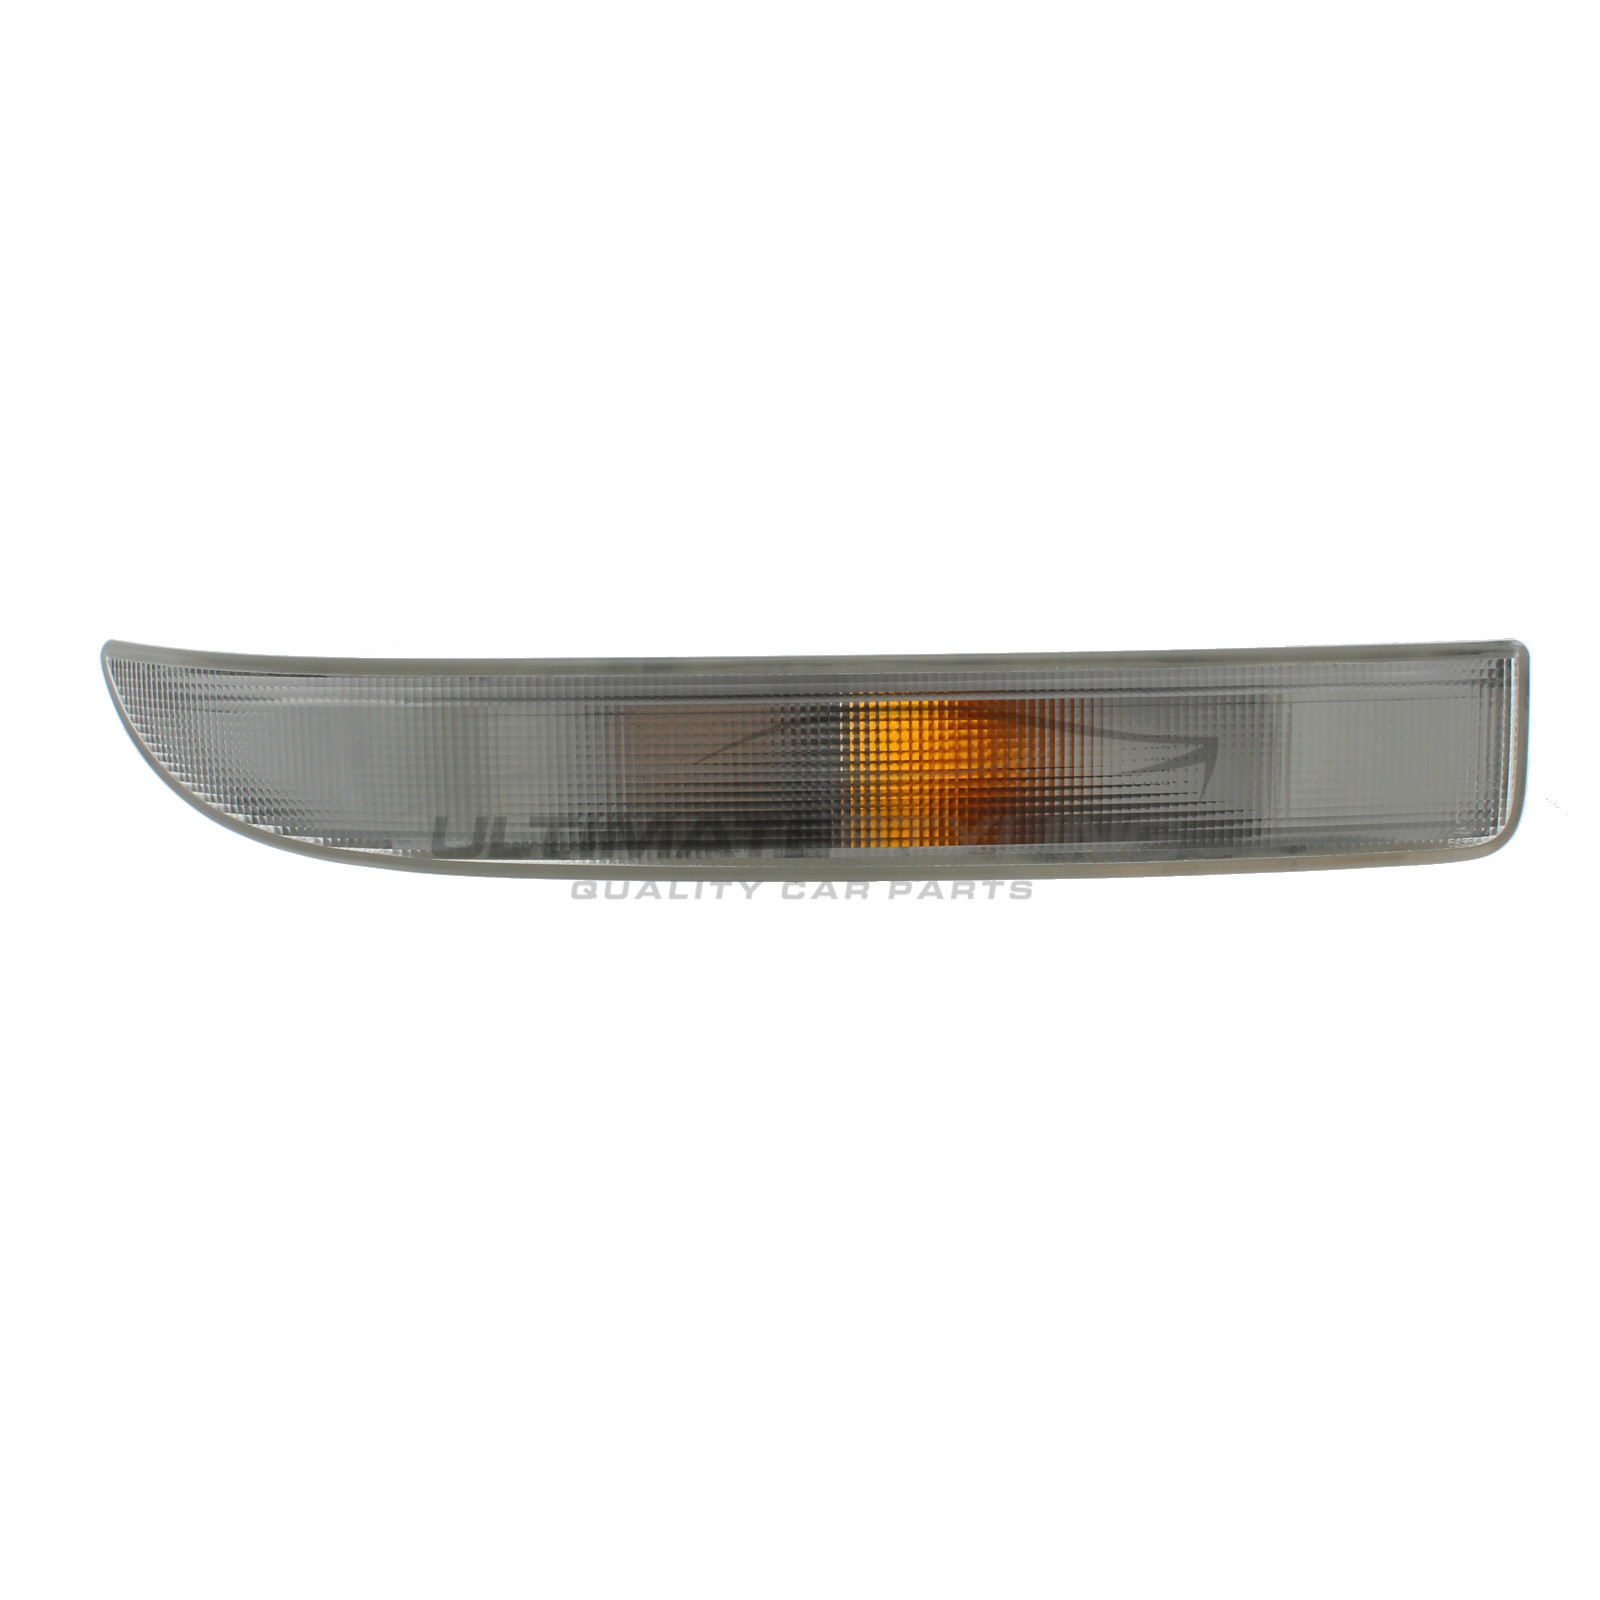 Nissan Interstar 2002-2003 / Renault Master 1998-2003 / Vauxhall Movano 1998-2003 Clear Front Indicator Excludes Bulb Holder - Drivers Side (RH)